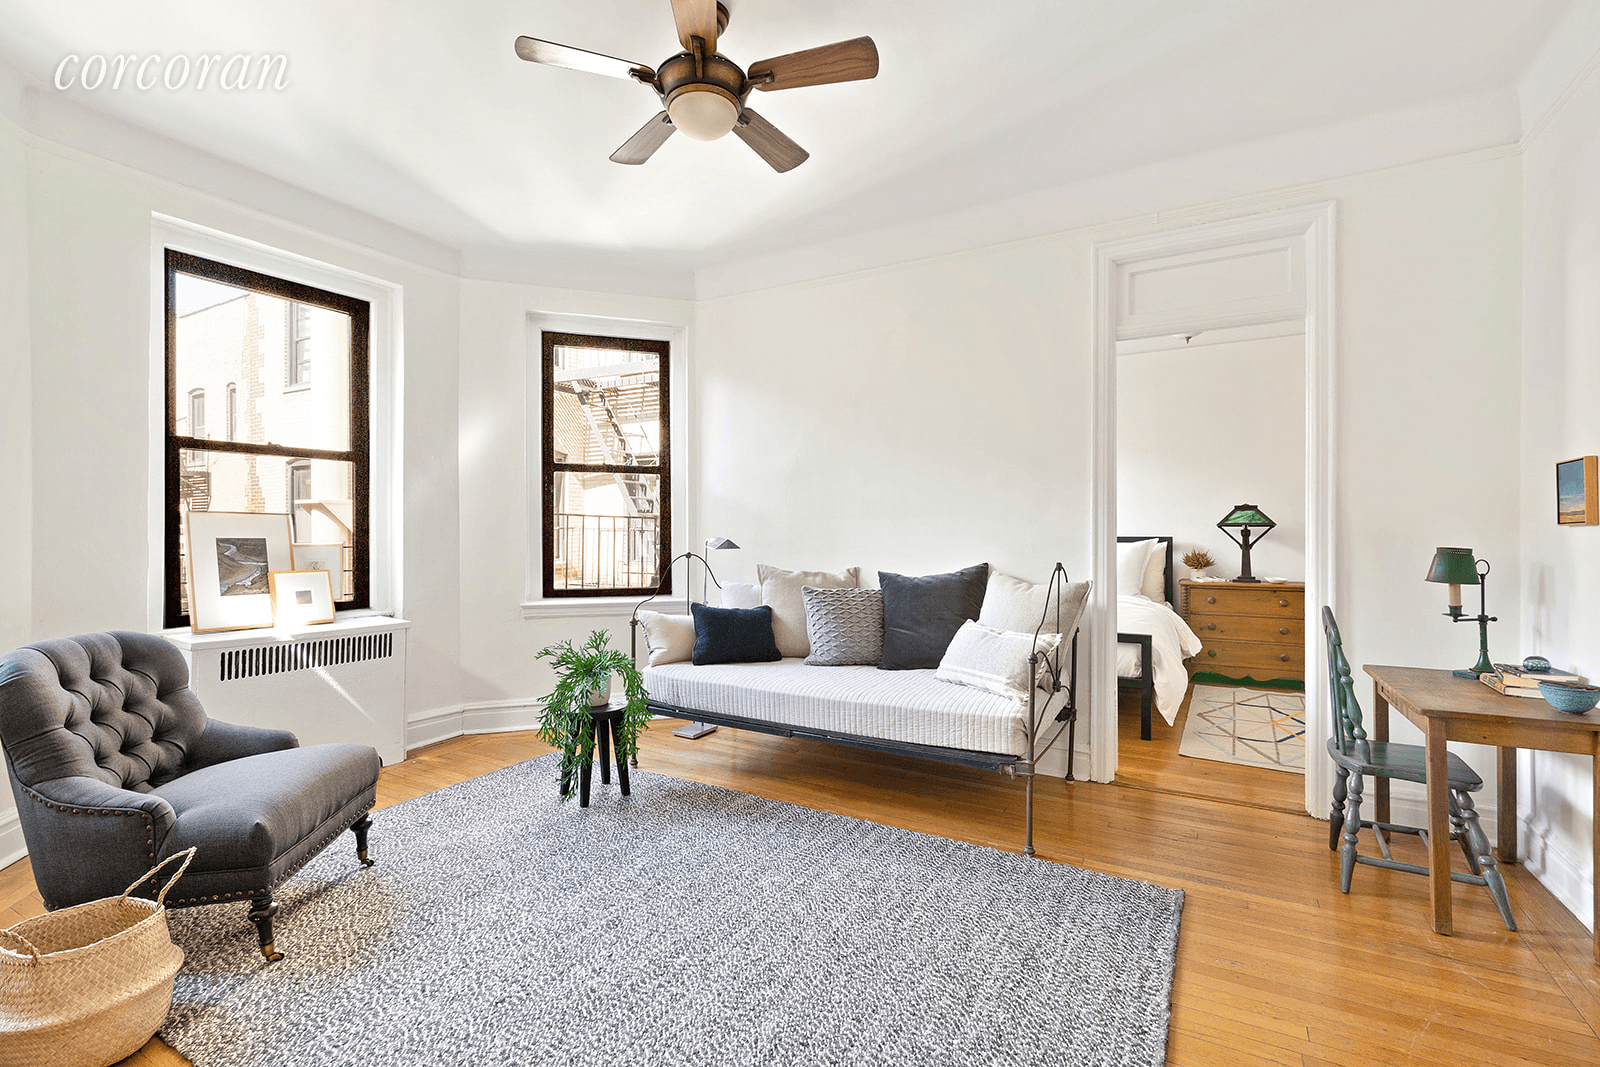 Tucked away in a historic landmarked pre war building, this one bedroom coop is located in prime Park Slope just one block from Prospect Park.